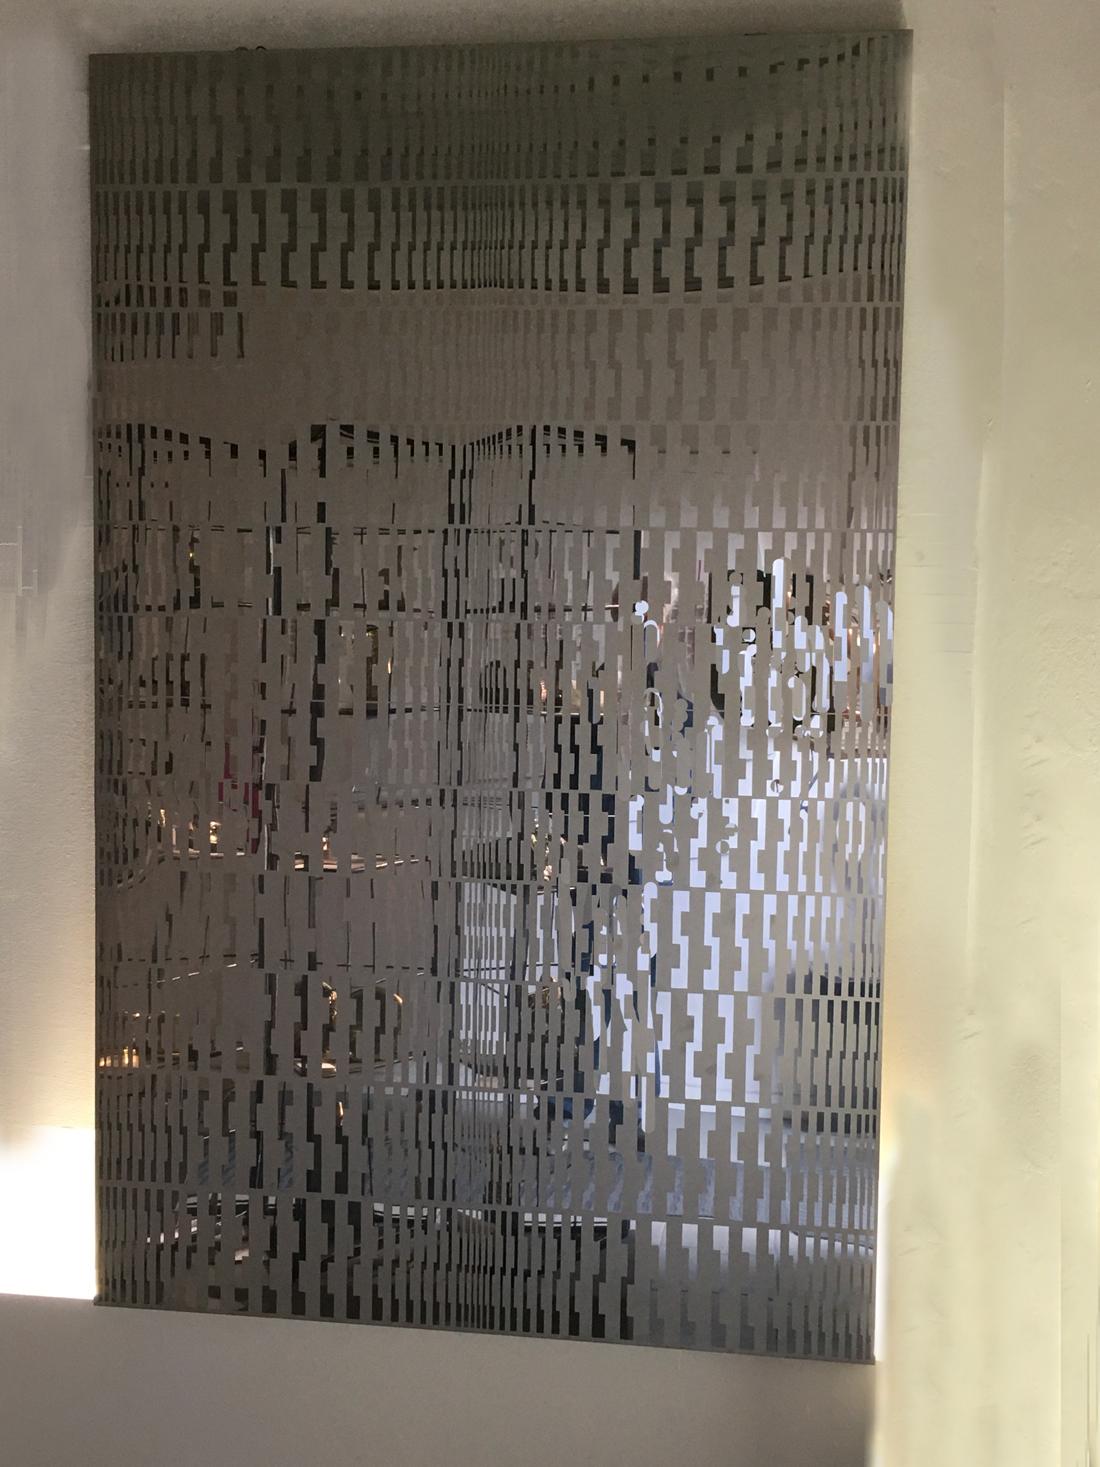 Modular Kinetic Structure Frosted Stainless Steel Abstract Wall Scuplture Panel - Sculpture by Estuardo Maldonado